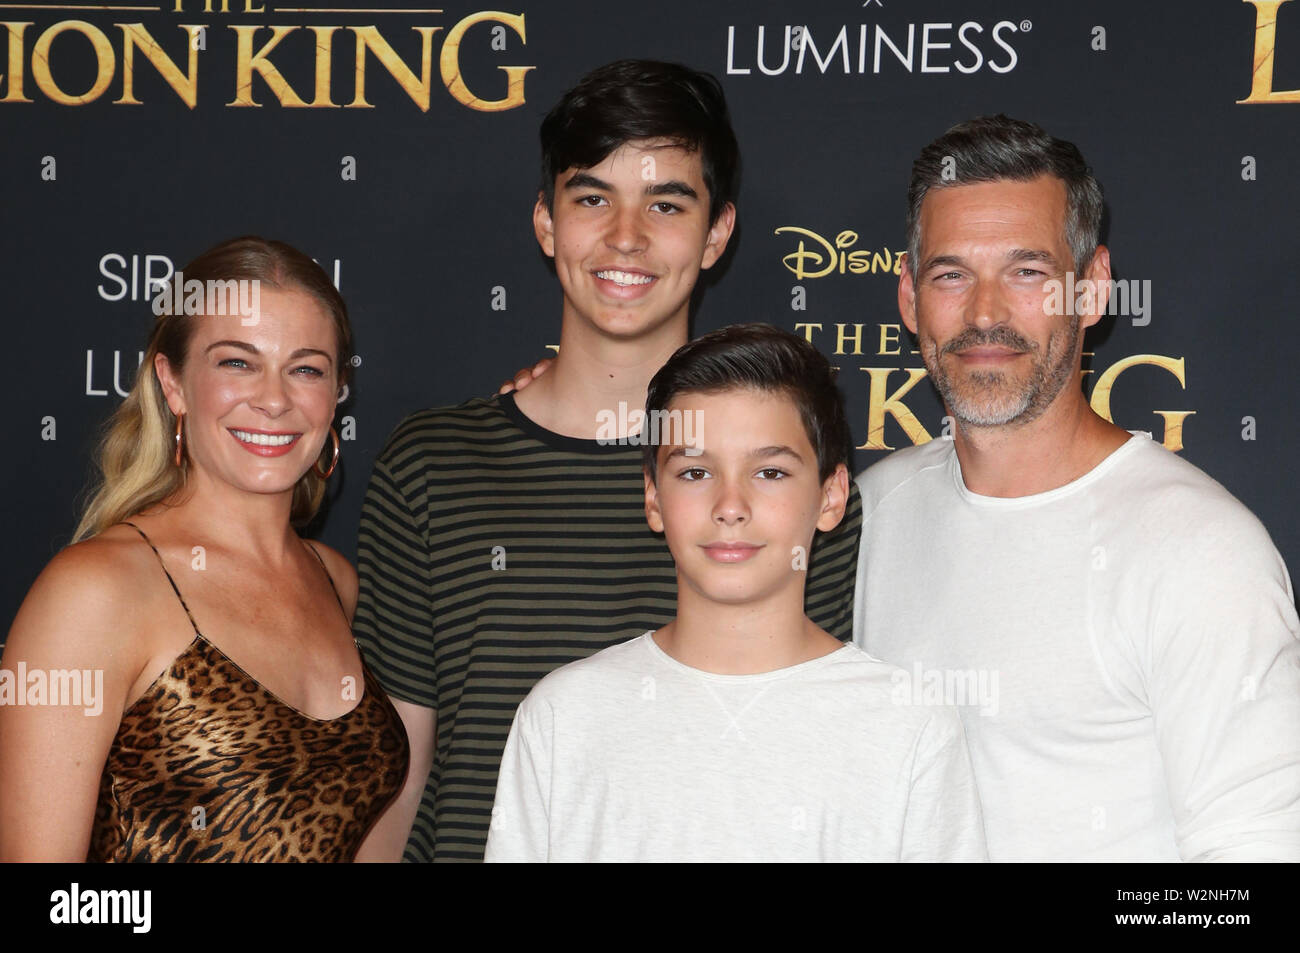 Hollywood, Ca. 9th July, 2019. LeAnn Rimes, Eddie Cibrian, Family, at The Lion King Film Premiere at El Capitan theatre in Hollywood, California on July 9, 2019. Credit: Faye Sadou/Media Punch/Alamy Live News Stock Photo